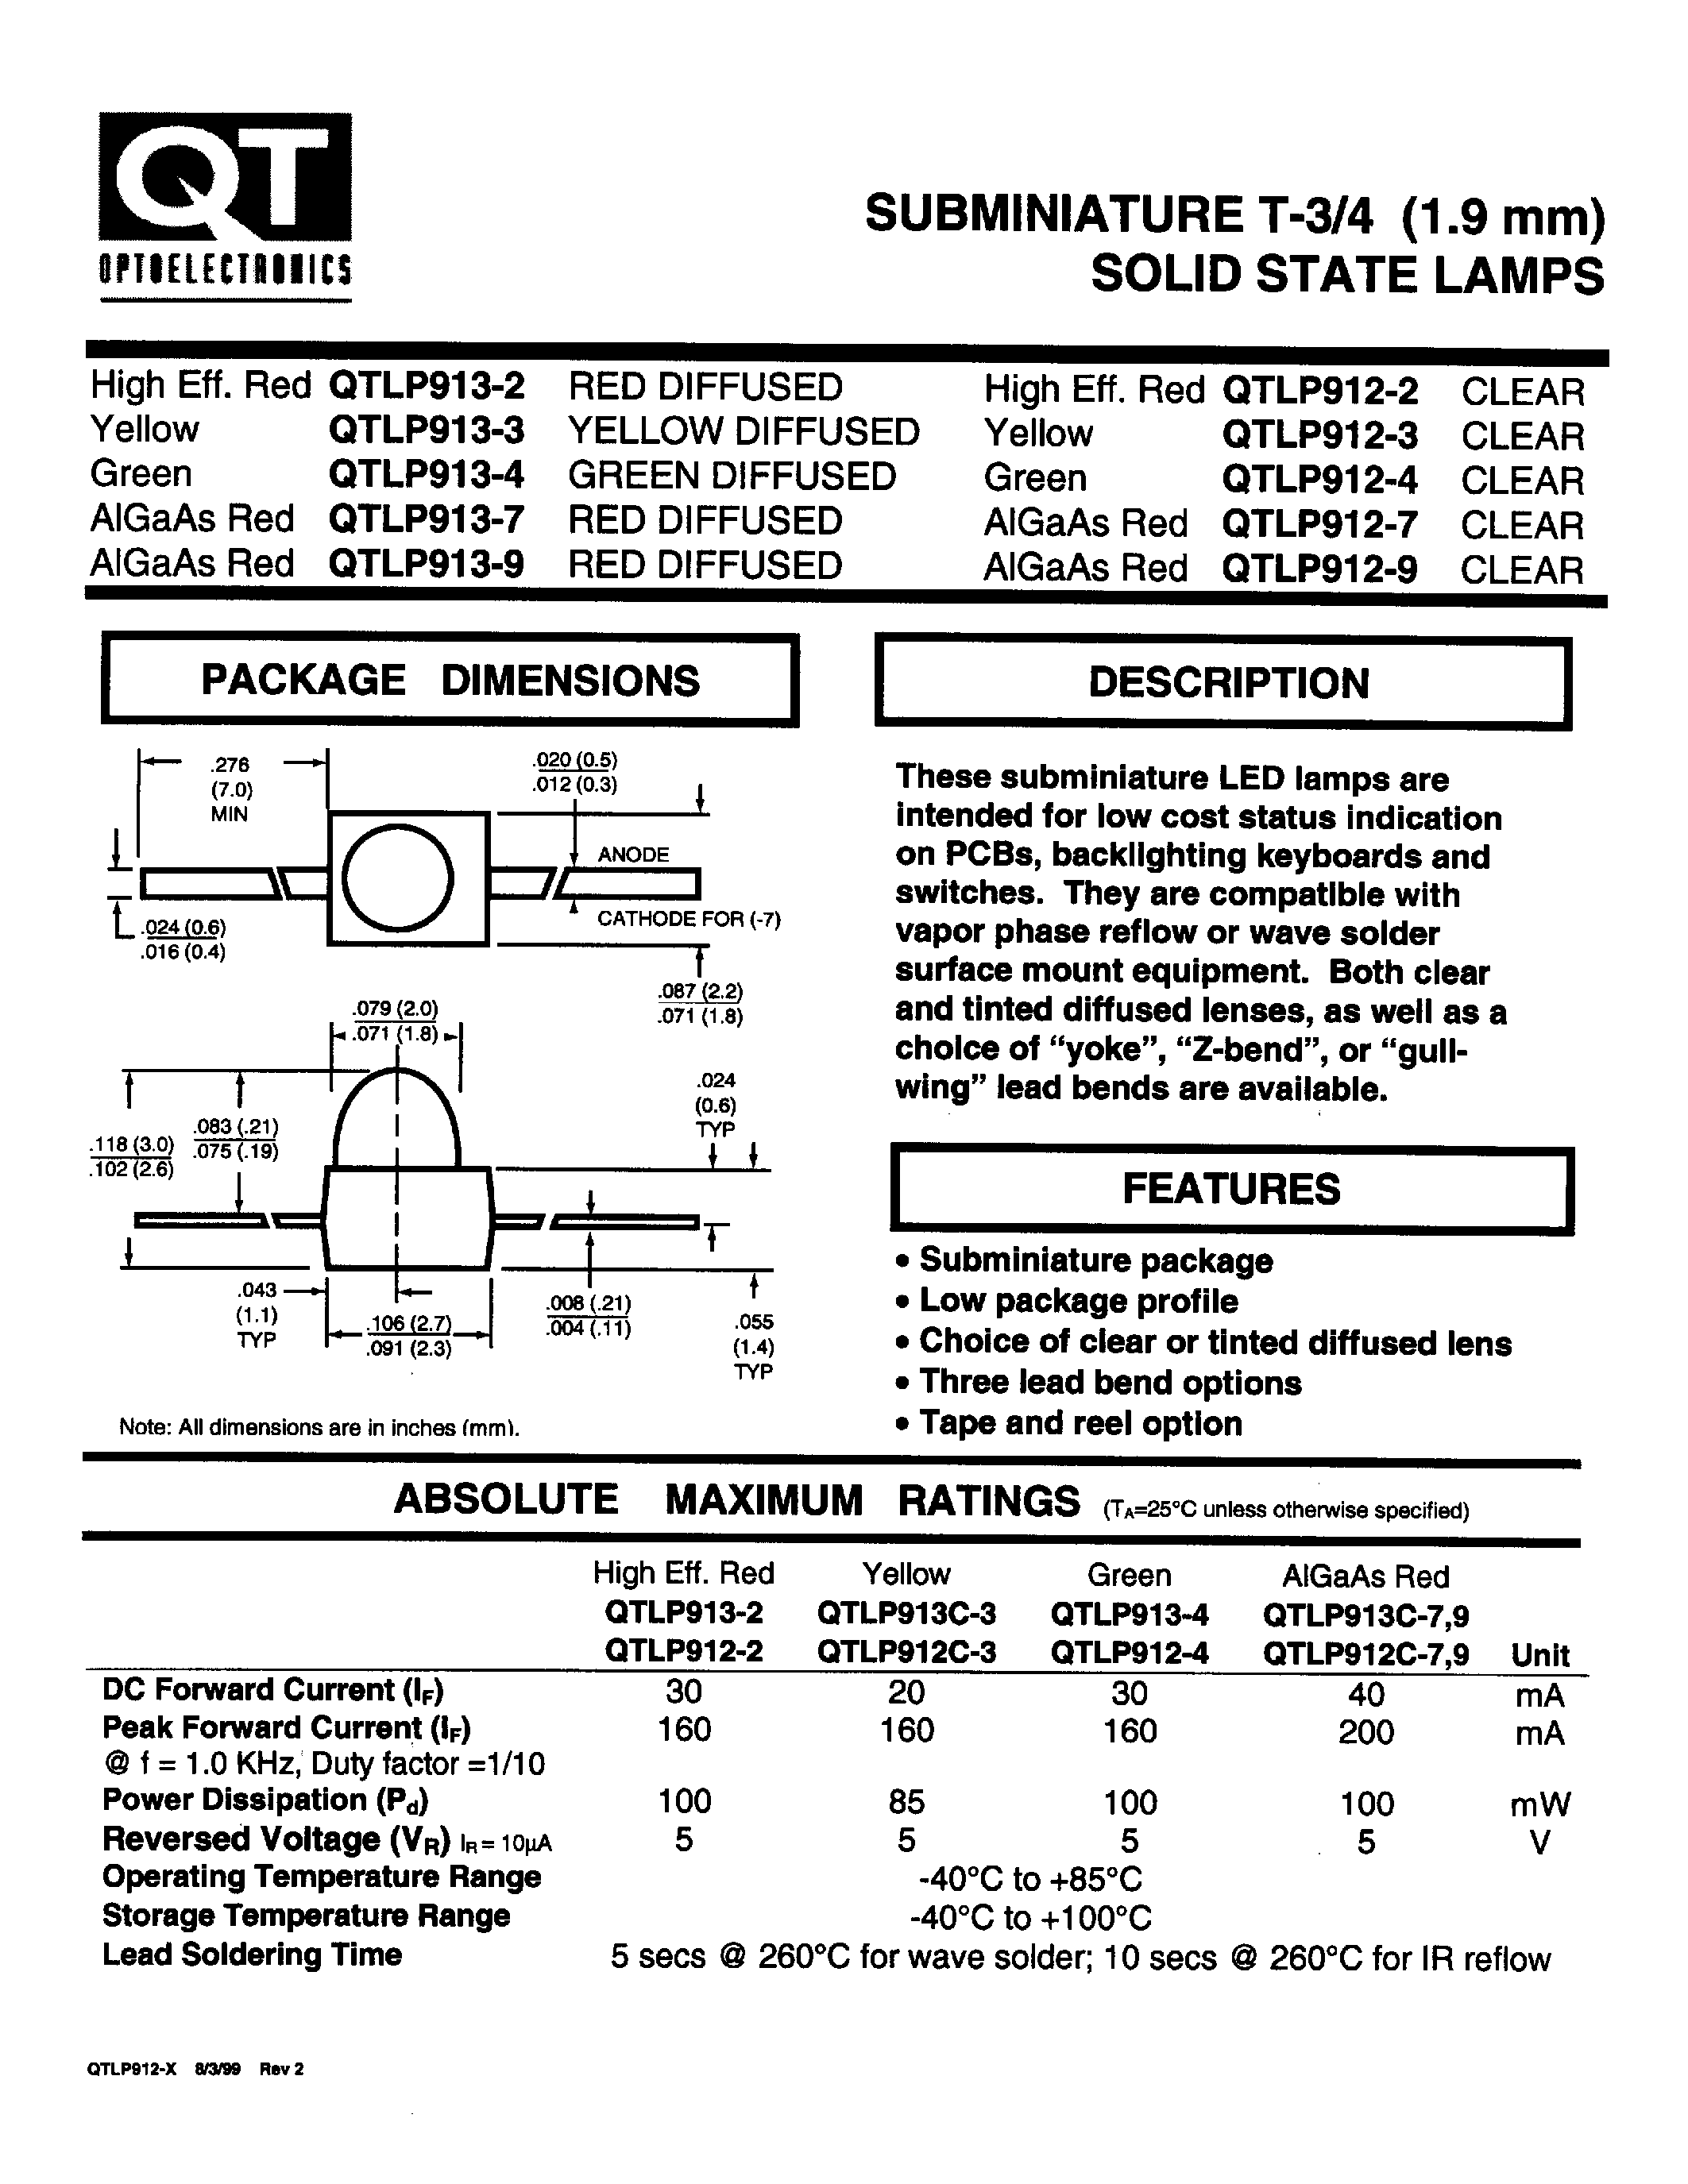 Даташит QTLP913-9 - SUBMINIATURE T-3/4 (1.9 mm) SOLID STATE LAMPS страница 1